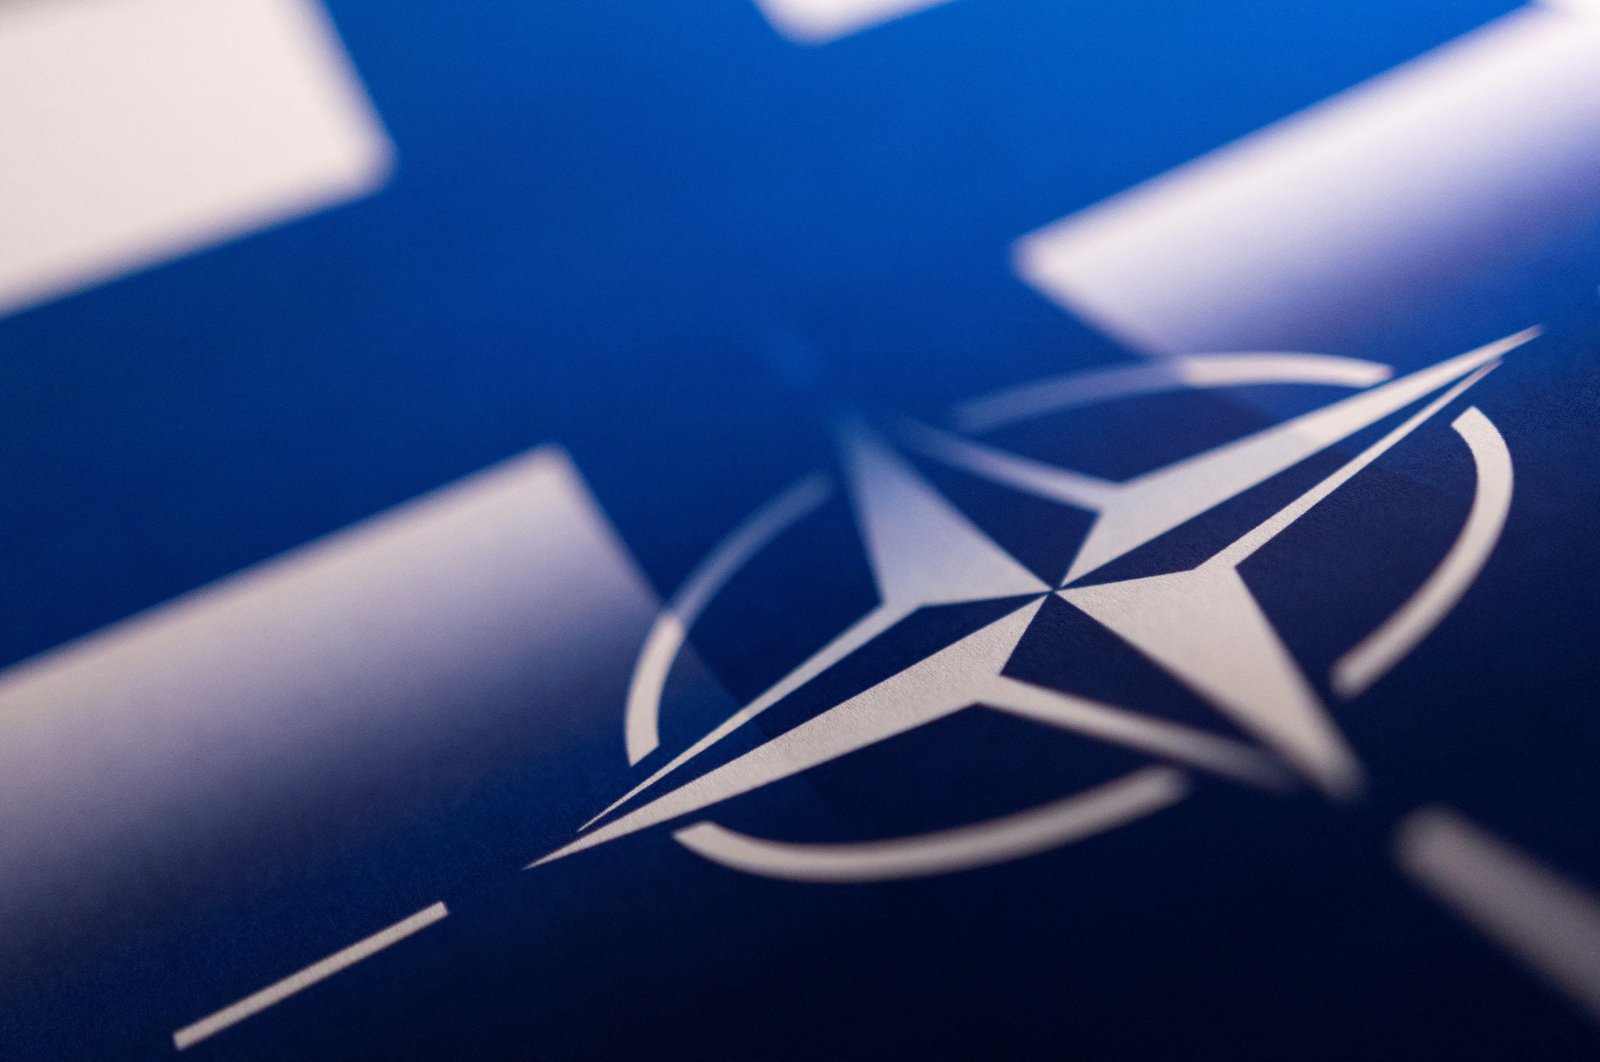 Finnish and NATO flags are seen printed on paper this illustration taken on April 13, 2022. (Reuters Photo)